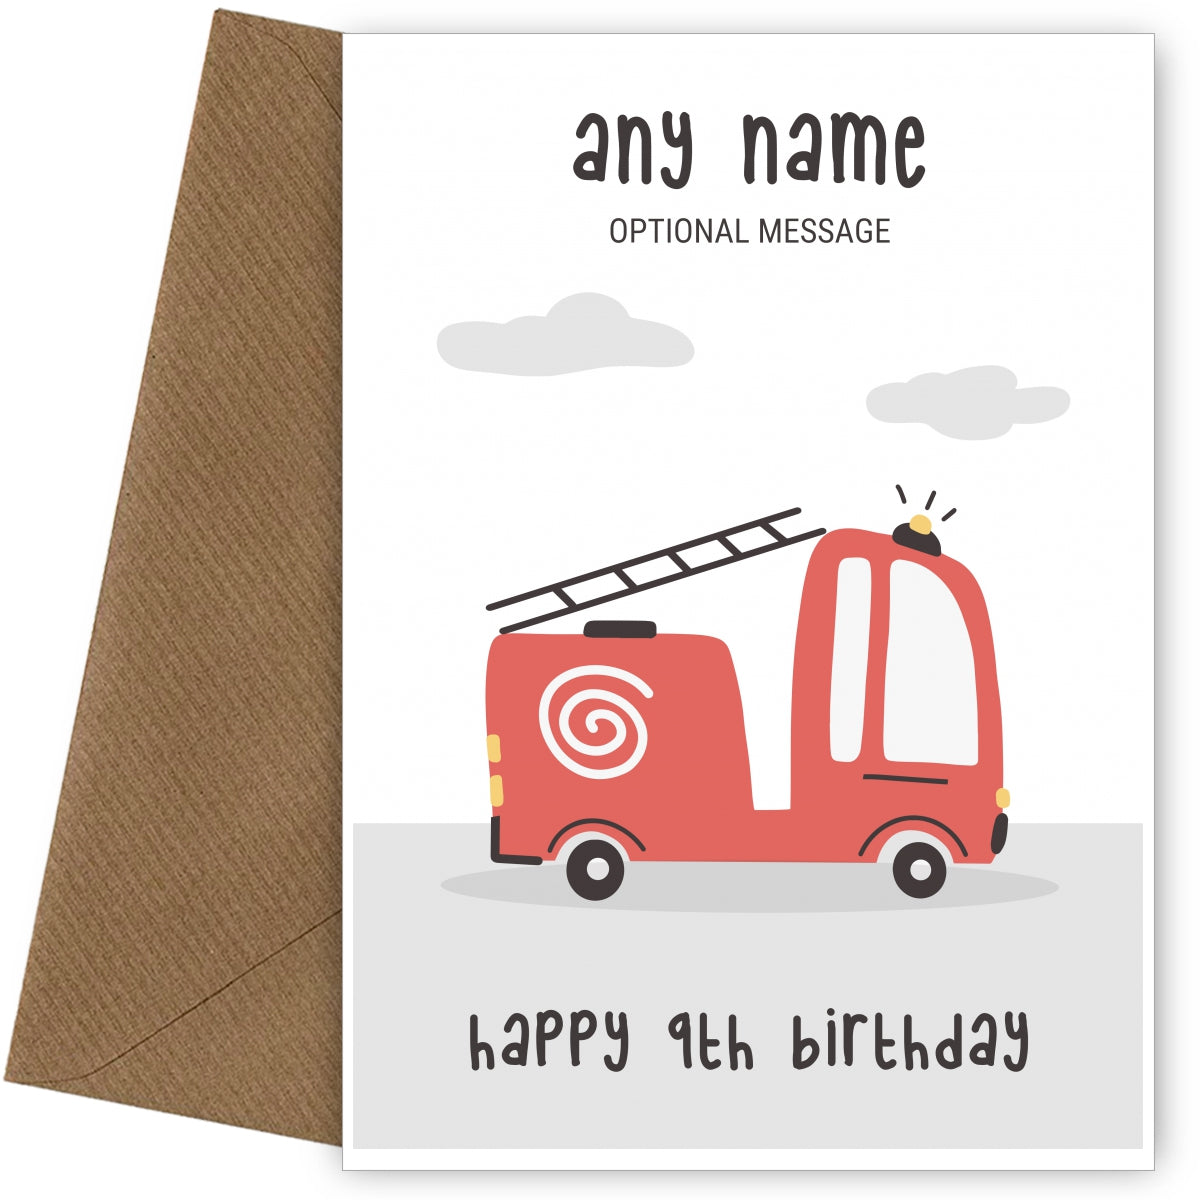 Fun Vehicles 9th Birthday Card for Any Name - Fire Engine